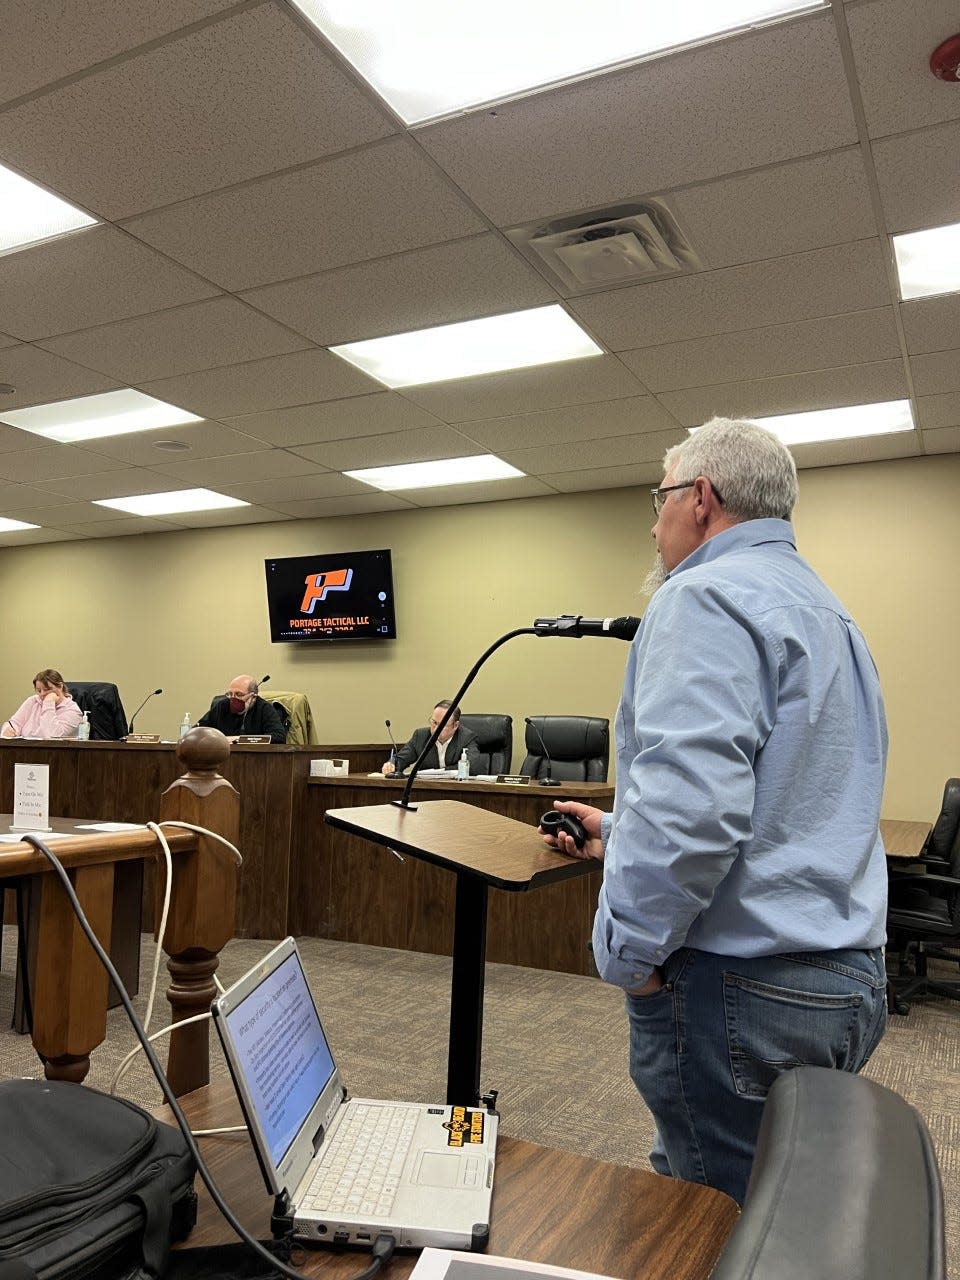 Arthur Hrdlicka, owner of Portage Tactical, presents plans for his home-based business to the Ravenna Planning Commission. Hrdlicka was granted a conditional use permit allowing him to sell firearms from his Ravenna home.